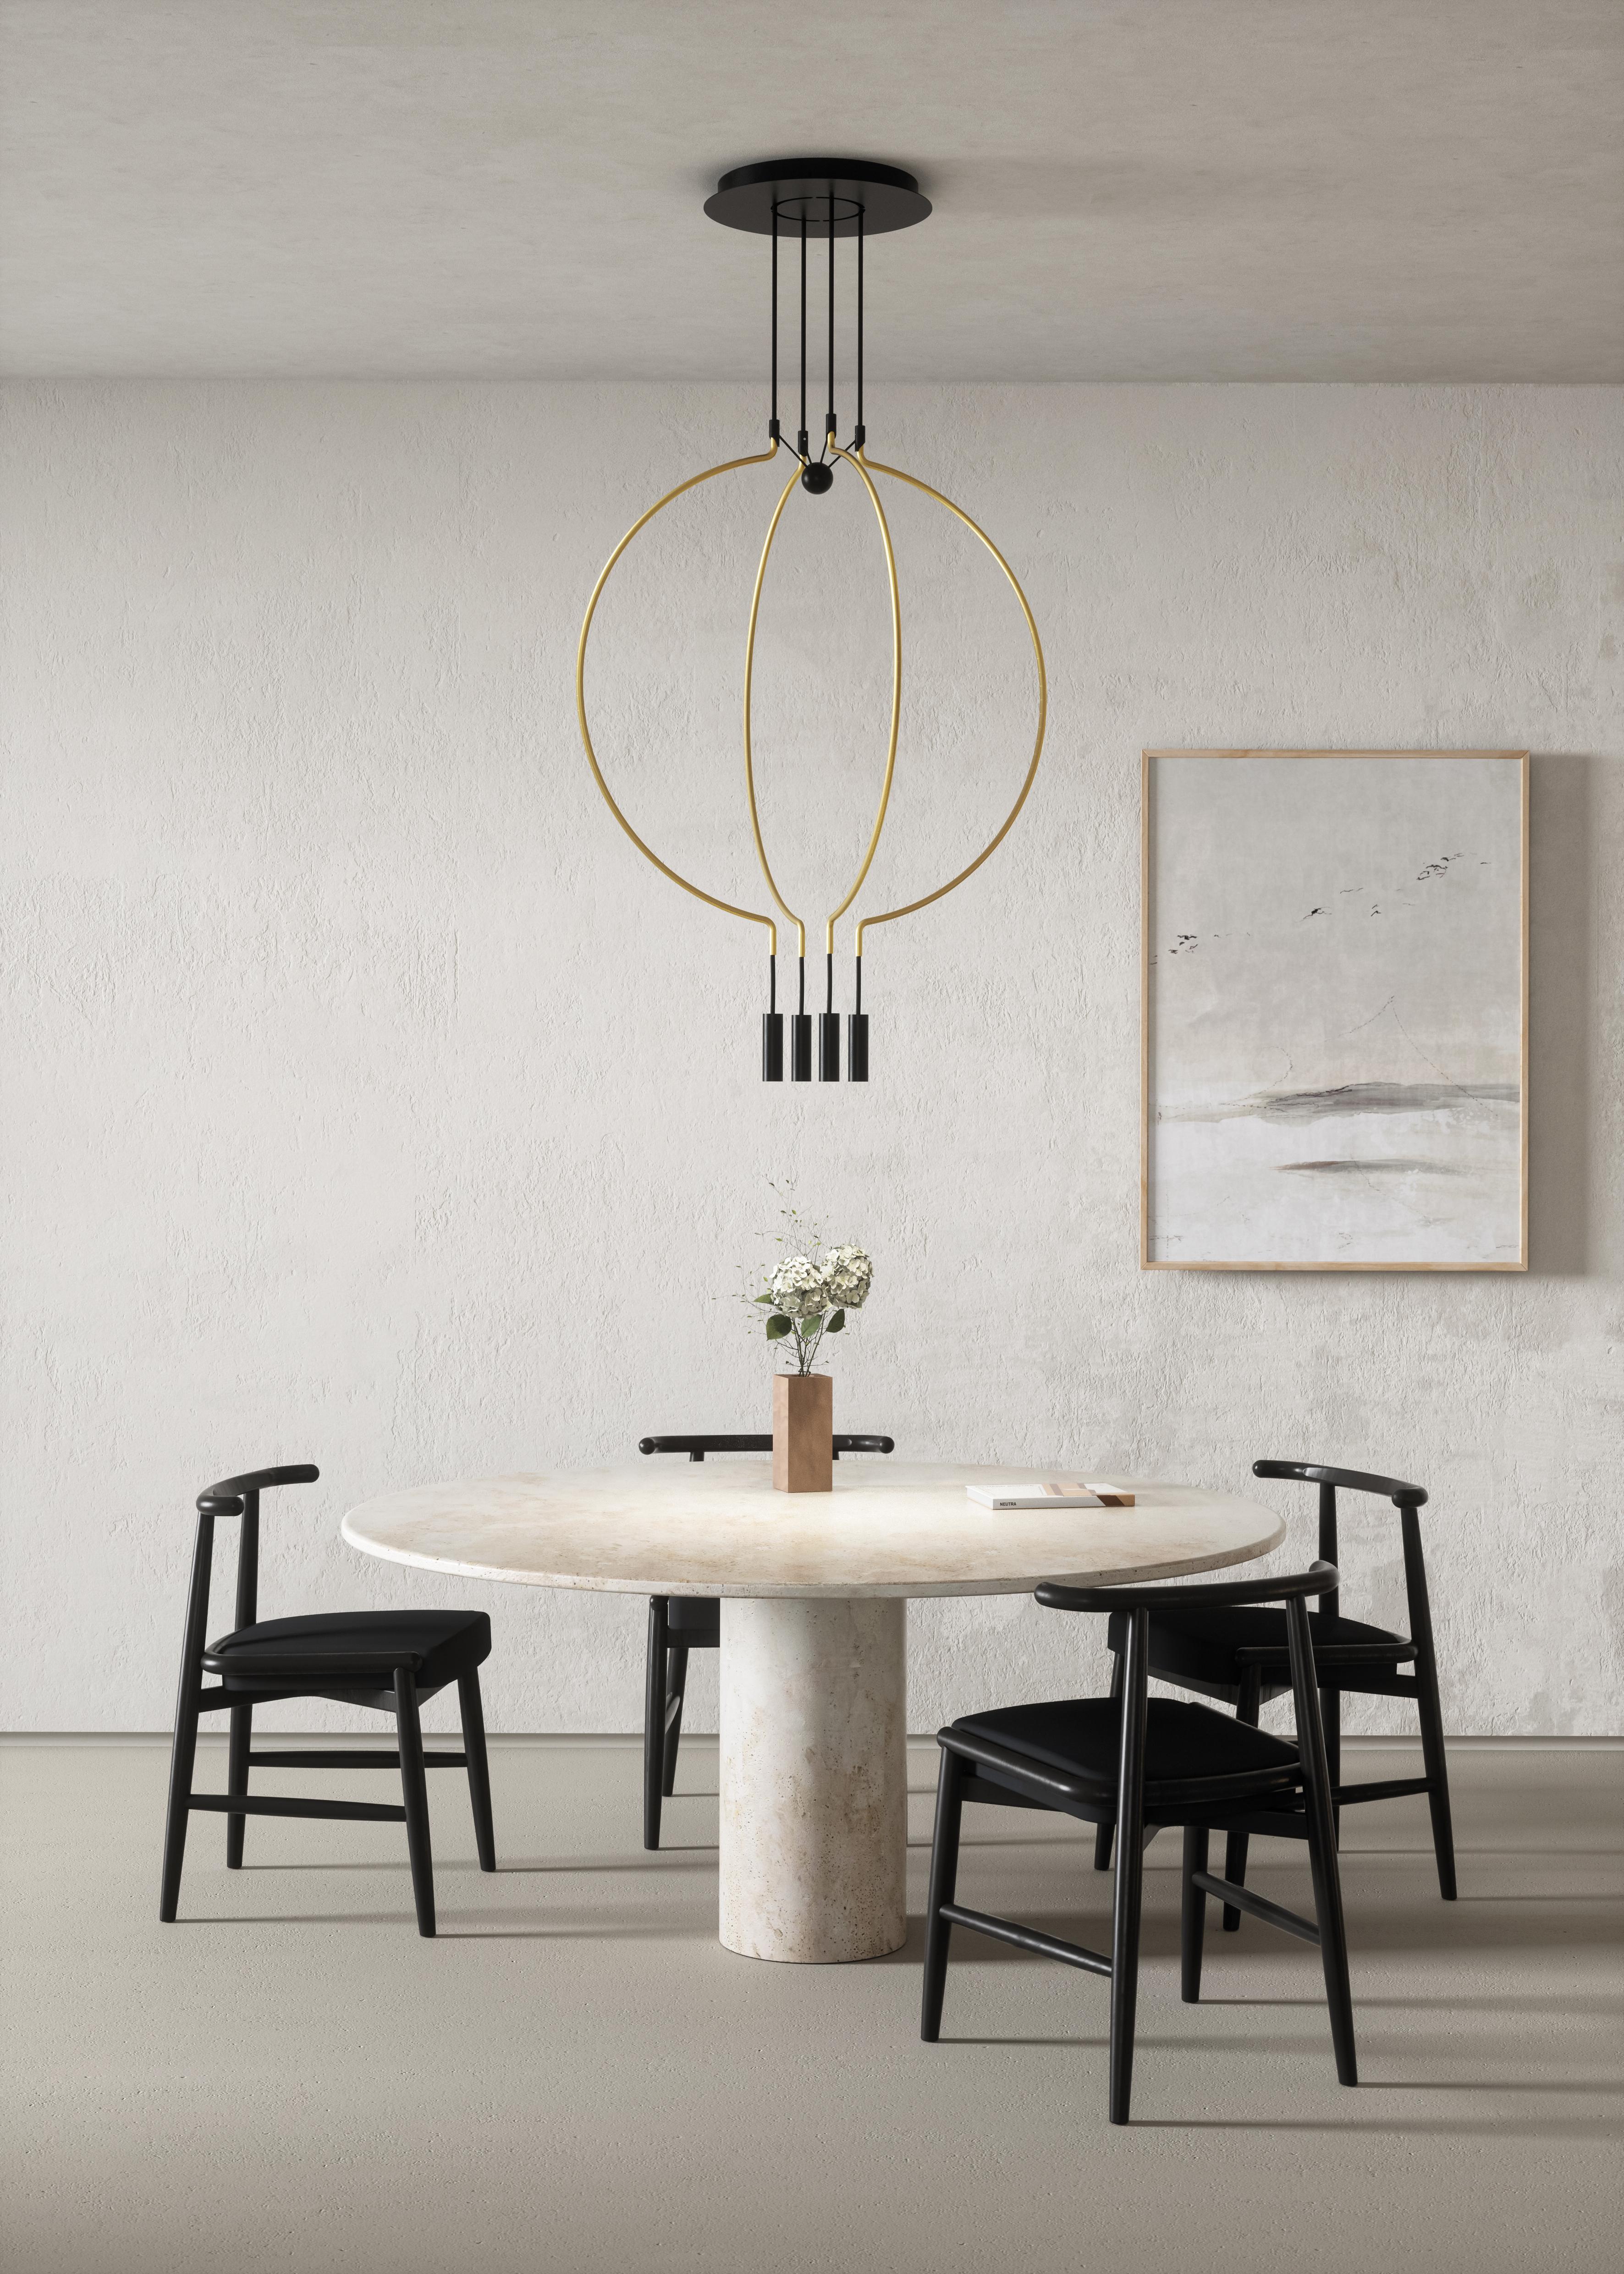 Axolight Liaison Model M2 Pendant Lamp in Black/Gold by Sara Moroni

Modular lightness and elegance. Liaison tells about the perfect balance of three geometric archetypes: sphere, circle and cylinder compose a system that includes the single pendant